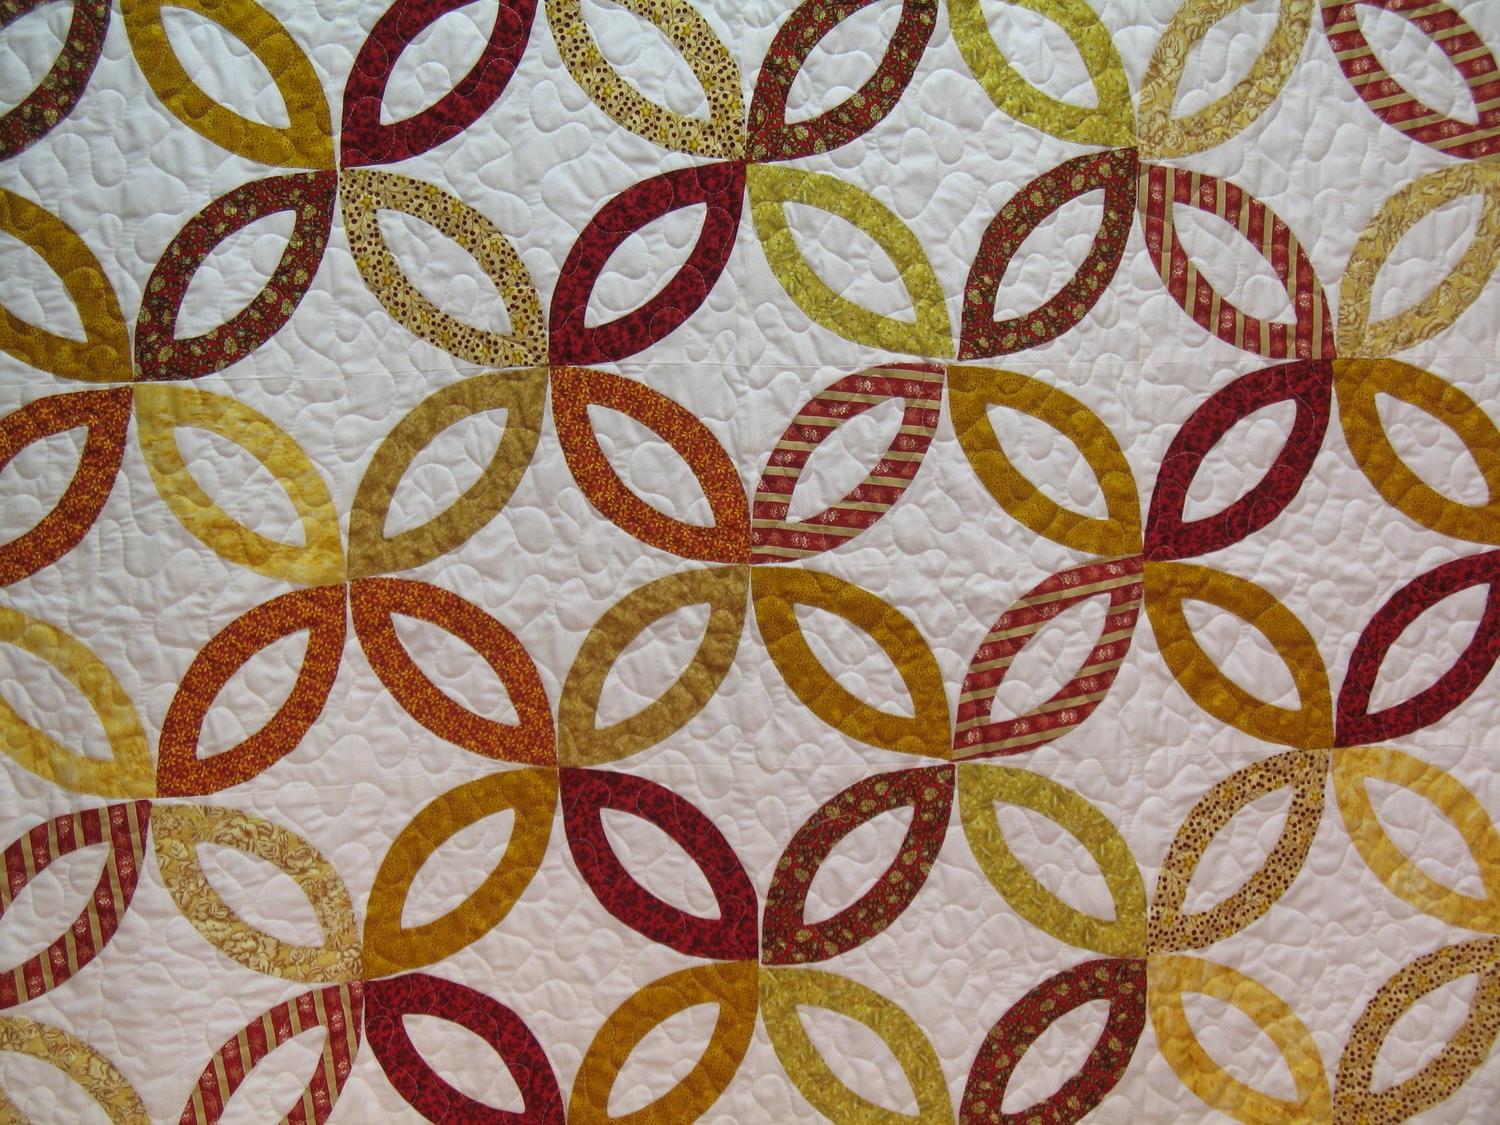 Double Wedding Ring Quilt in Yellows and Reds on White. From justsewquilts